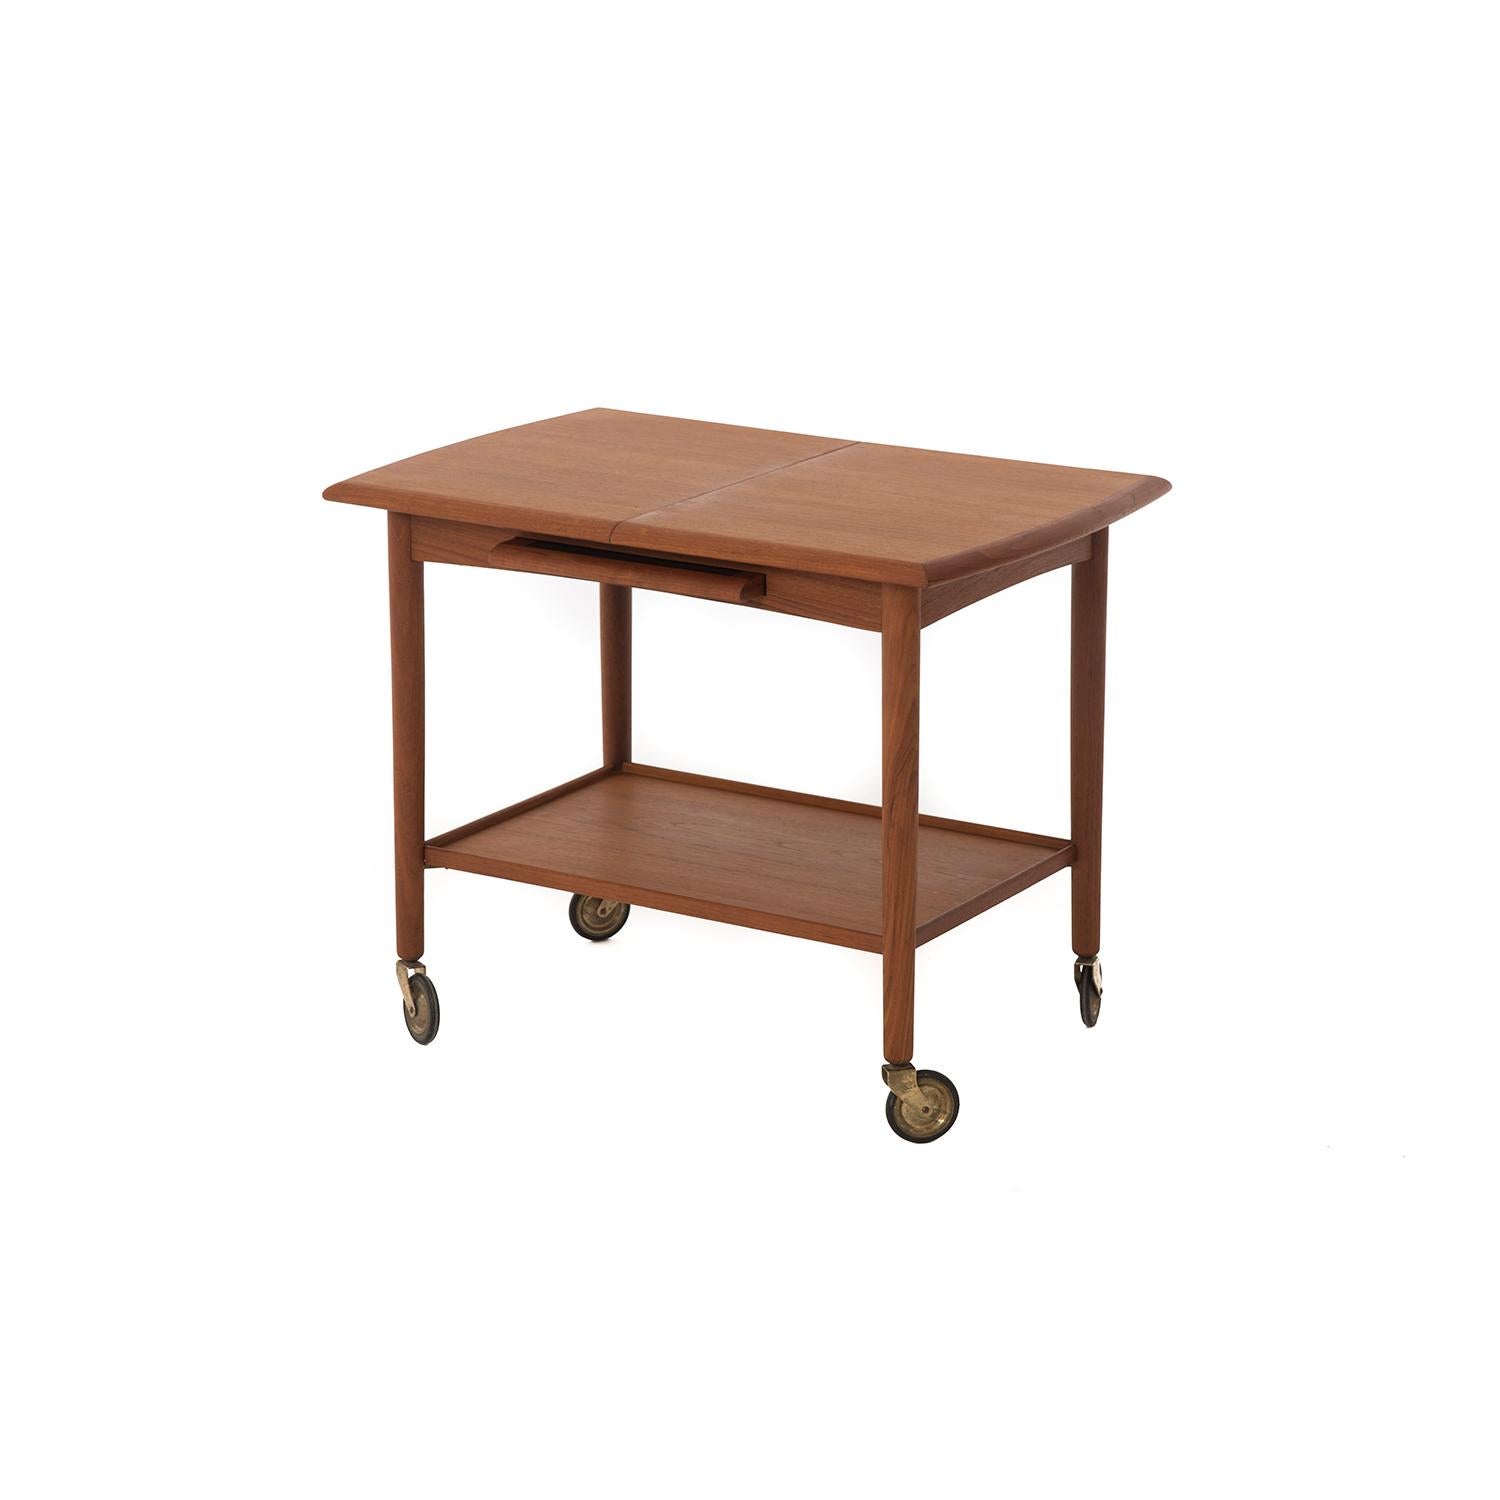 Expanding teak bar cart on wheels with built in storage for black laminate leaf, which can also be used as a serving tray or coaster.